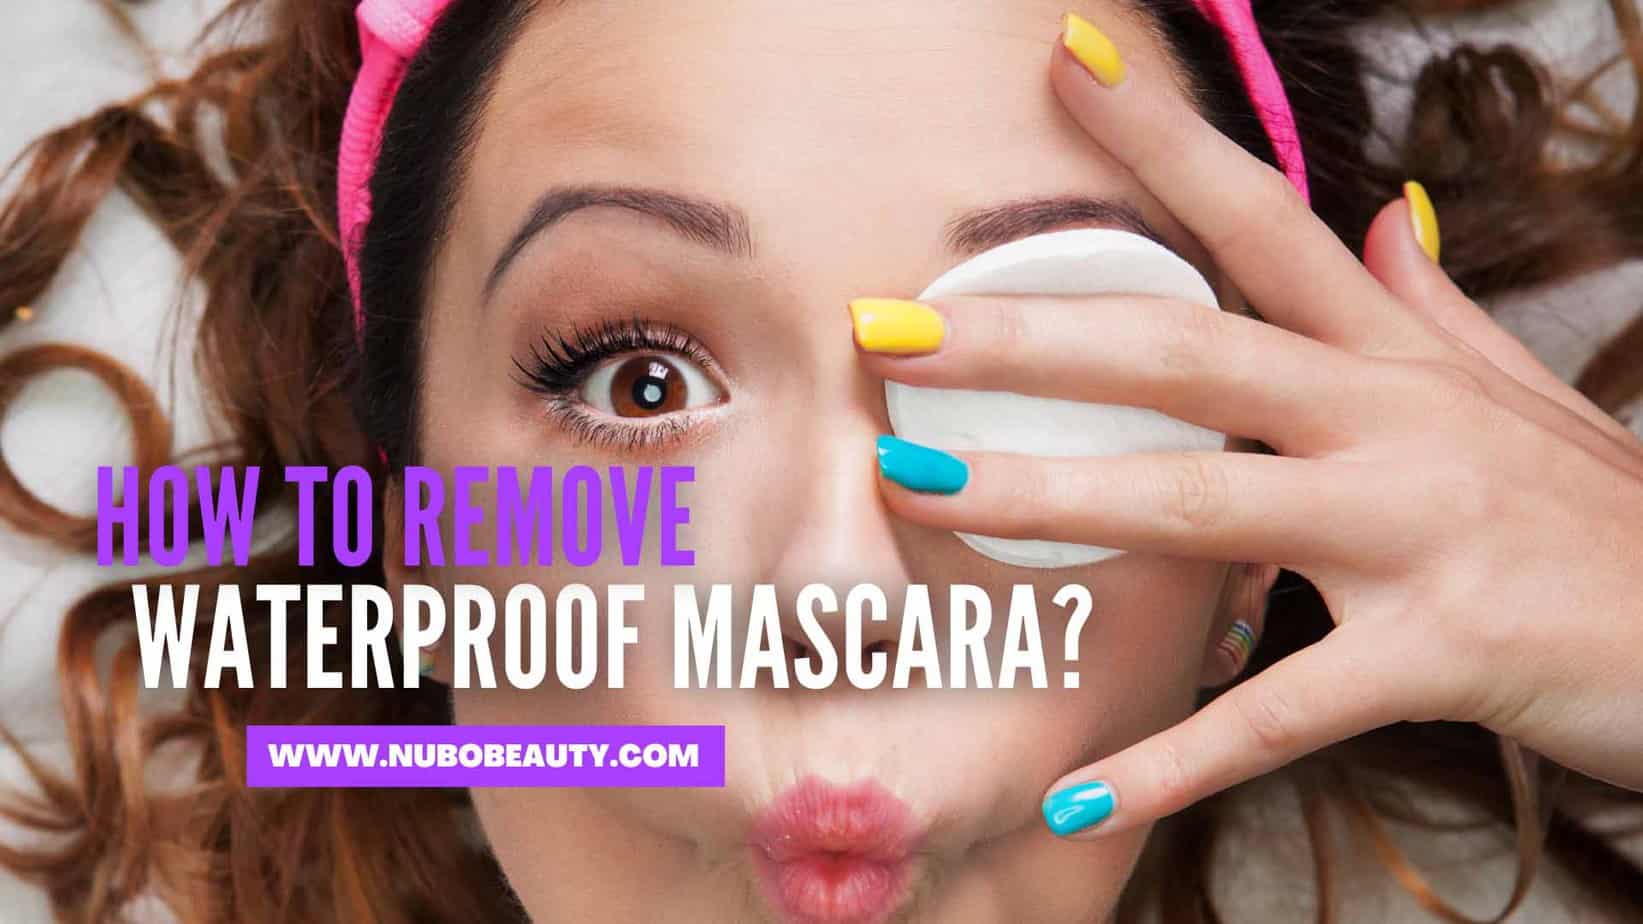 How To Remove Waterproof Mascara? Step-By-Step Guidelines | Nubo Beauty